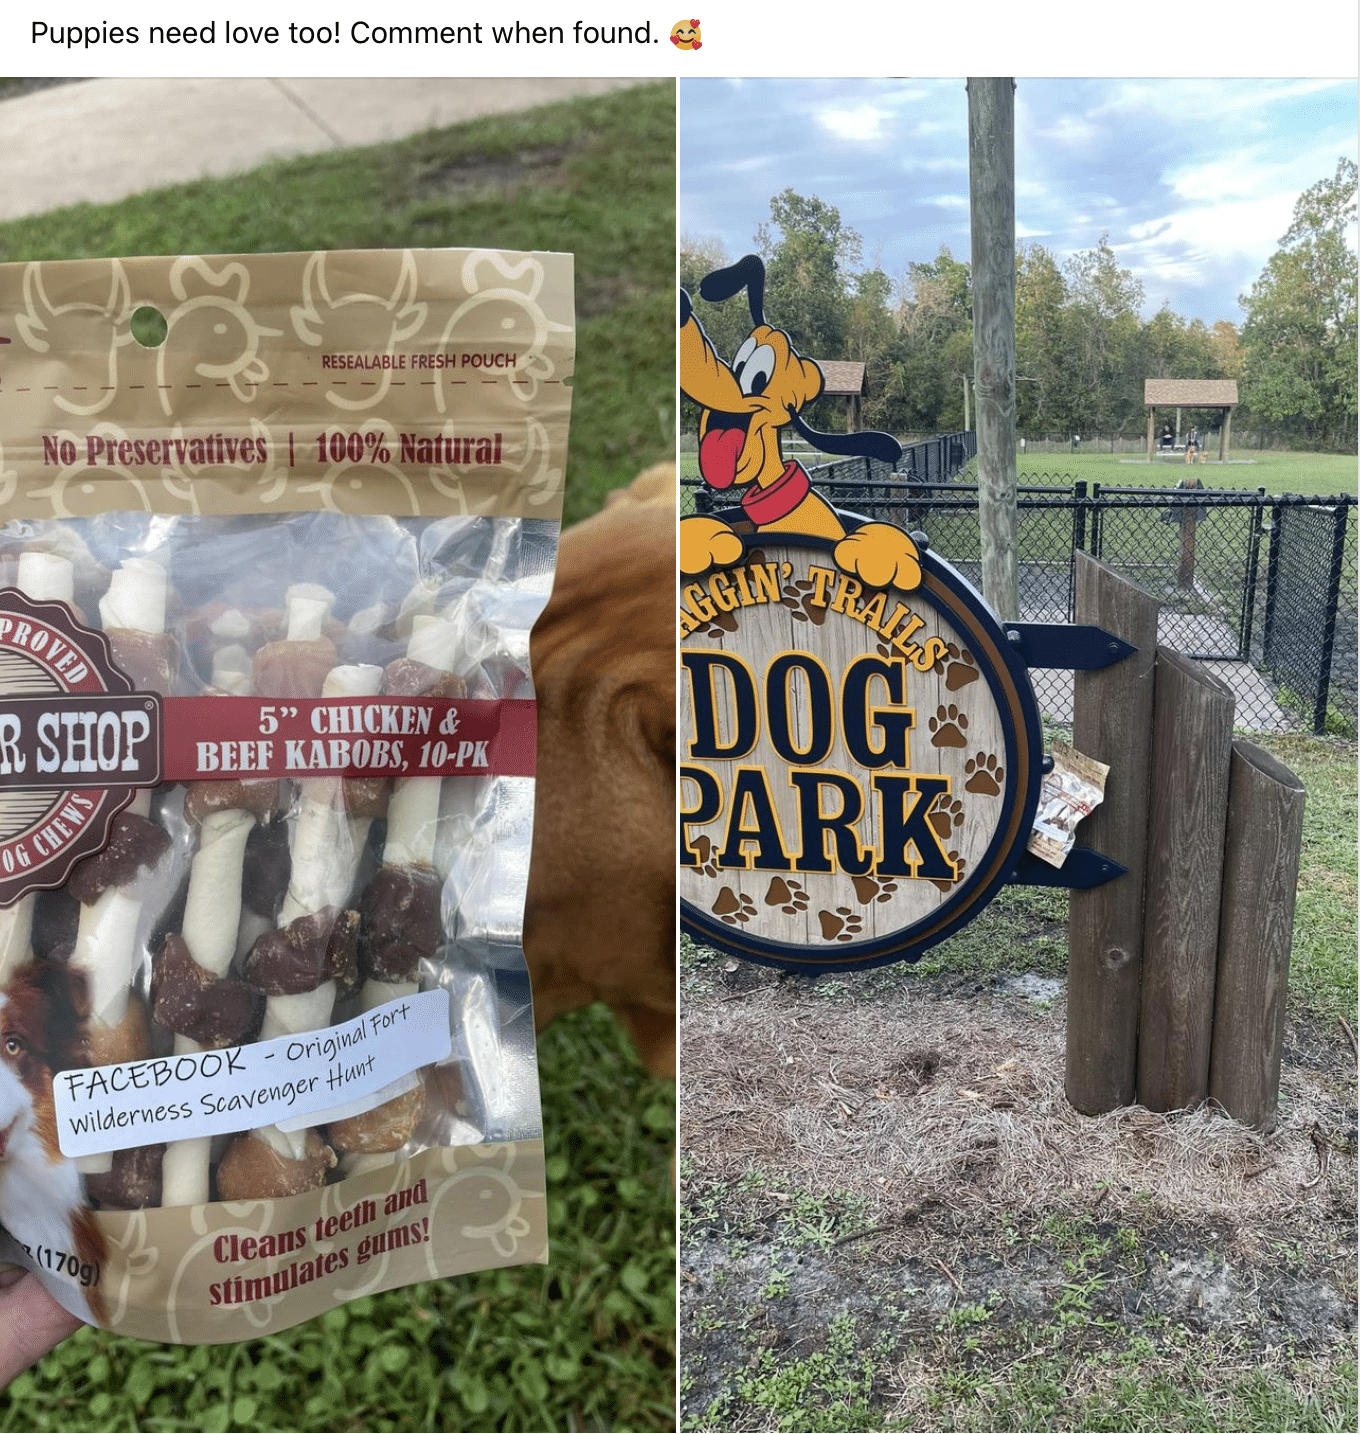 bag of dog treats next to Pluto Dog Park sign at Fort Wilderness Campground